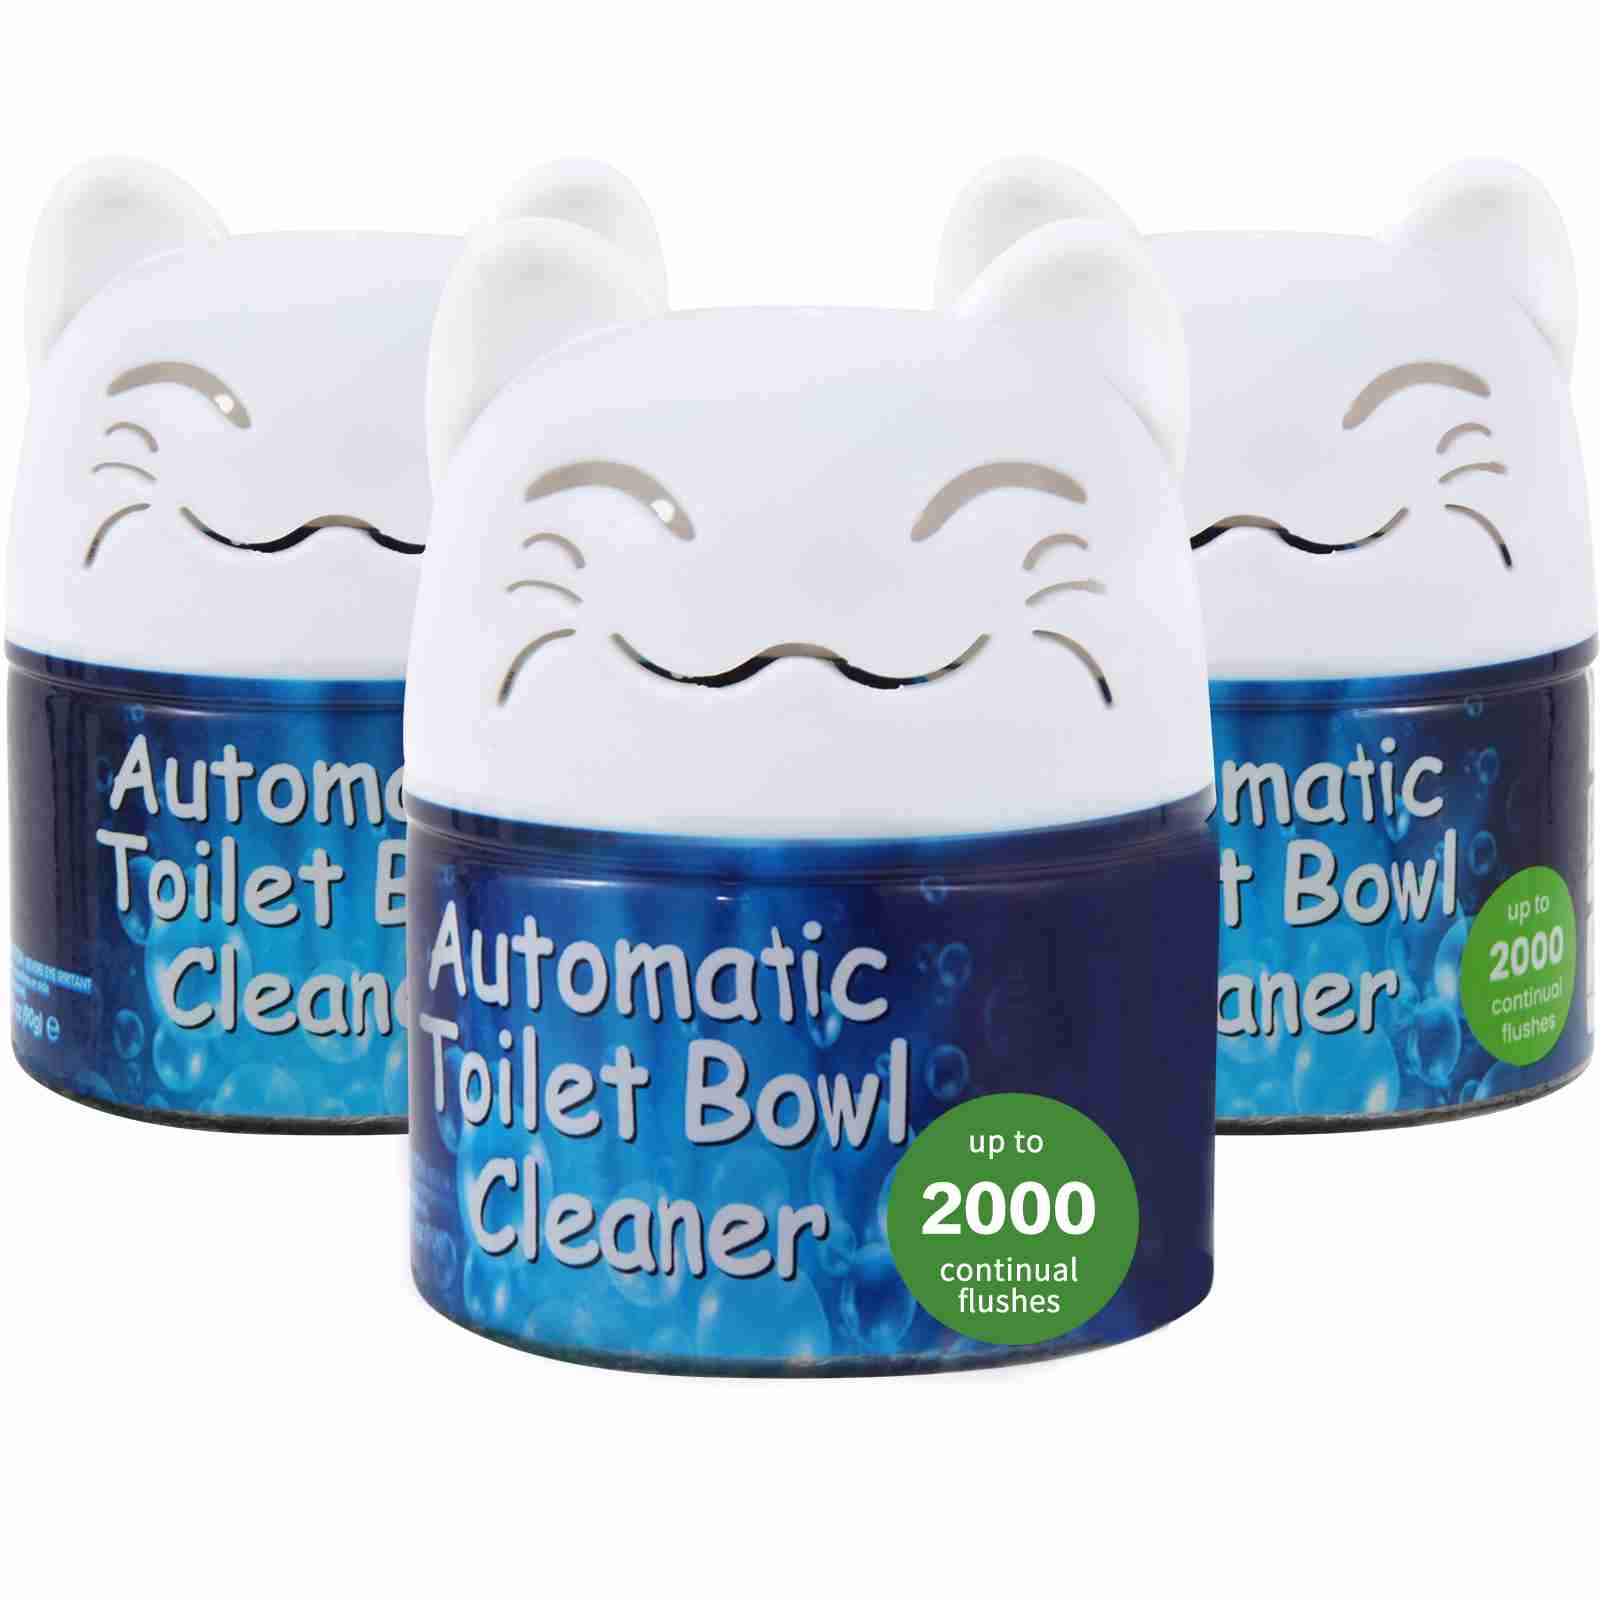 toilet-bowl-cleaner with cash back rebate